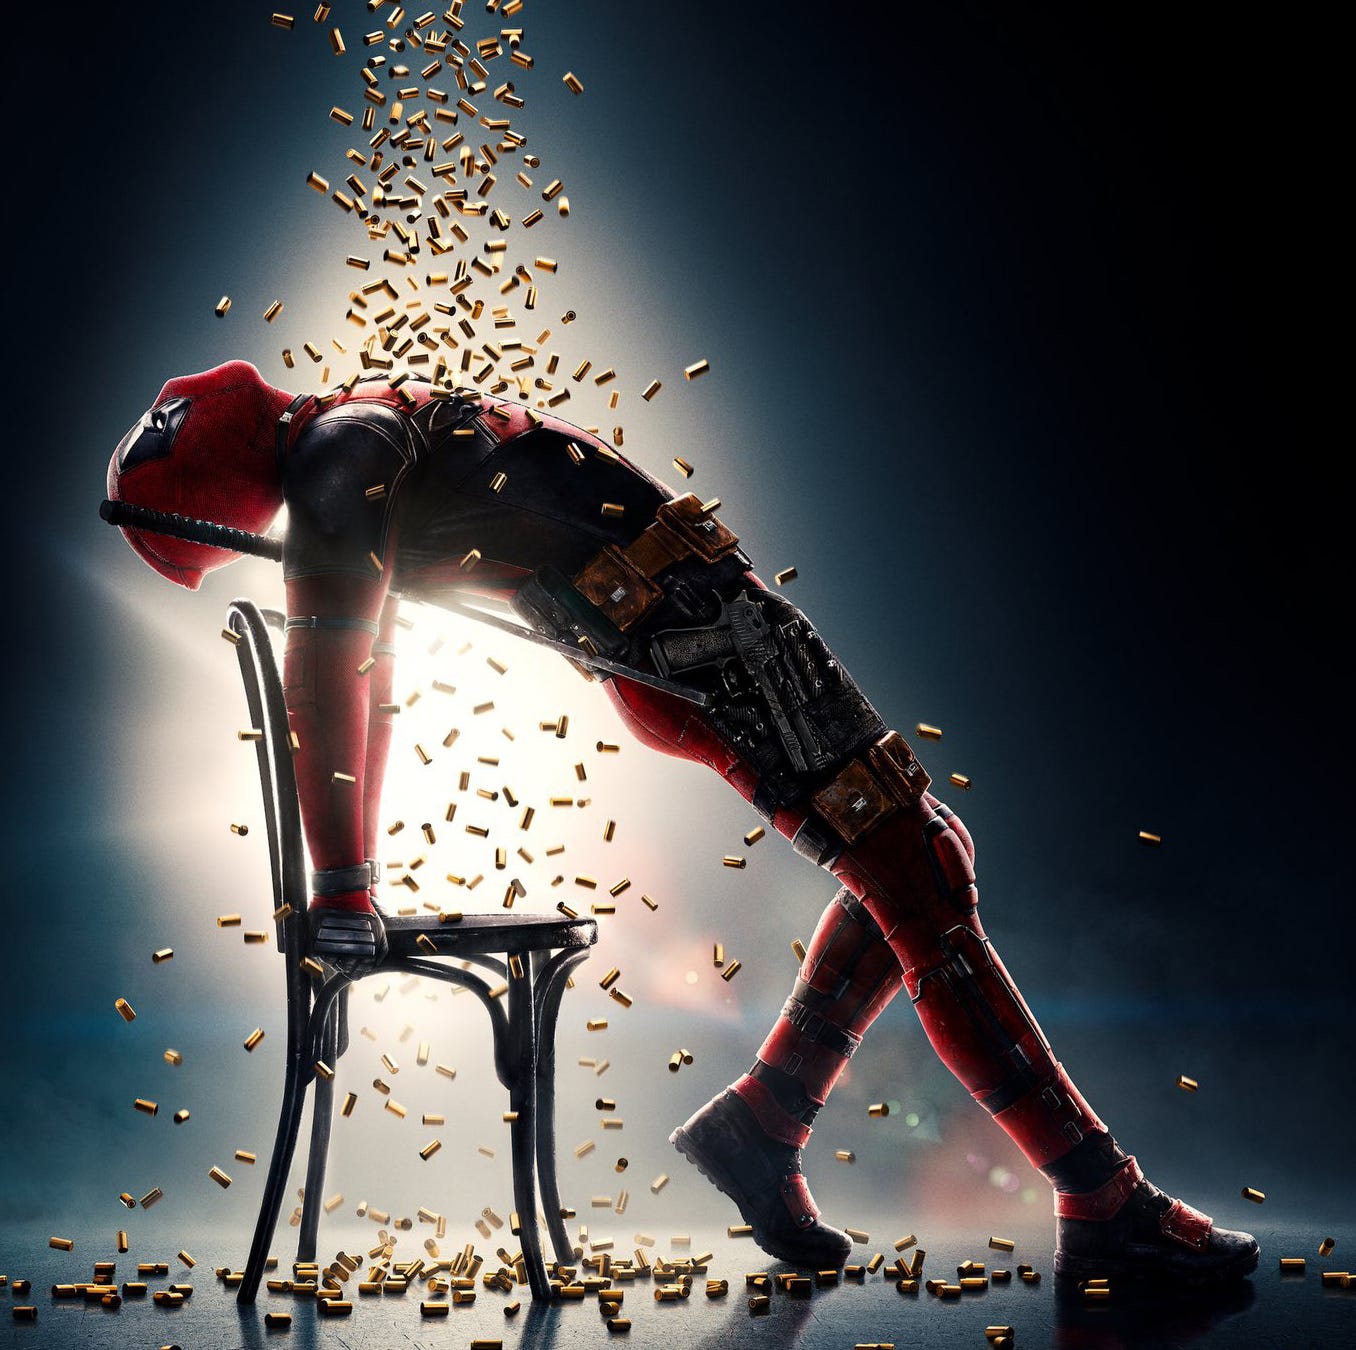 On Art Commercialism Deadpool 2 And A Culture Of Violence